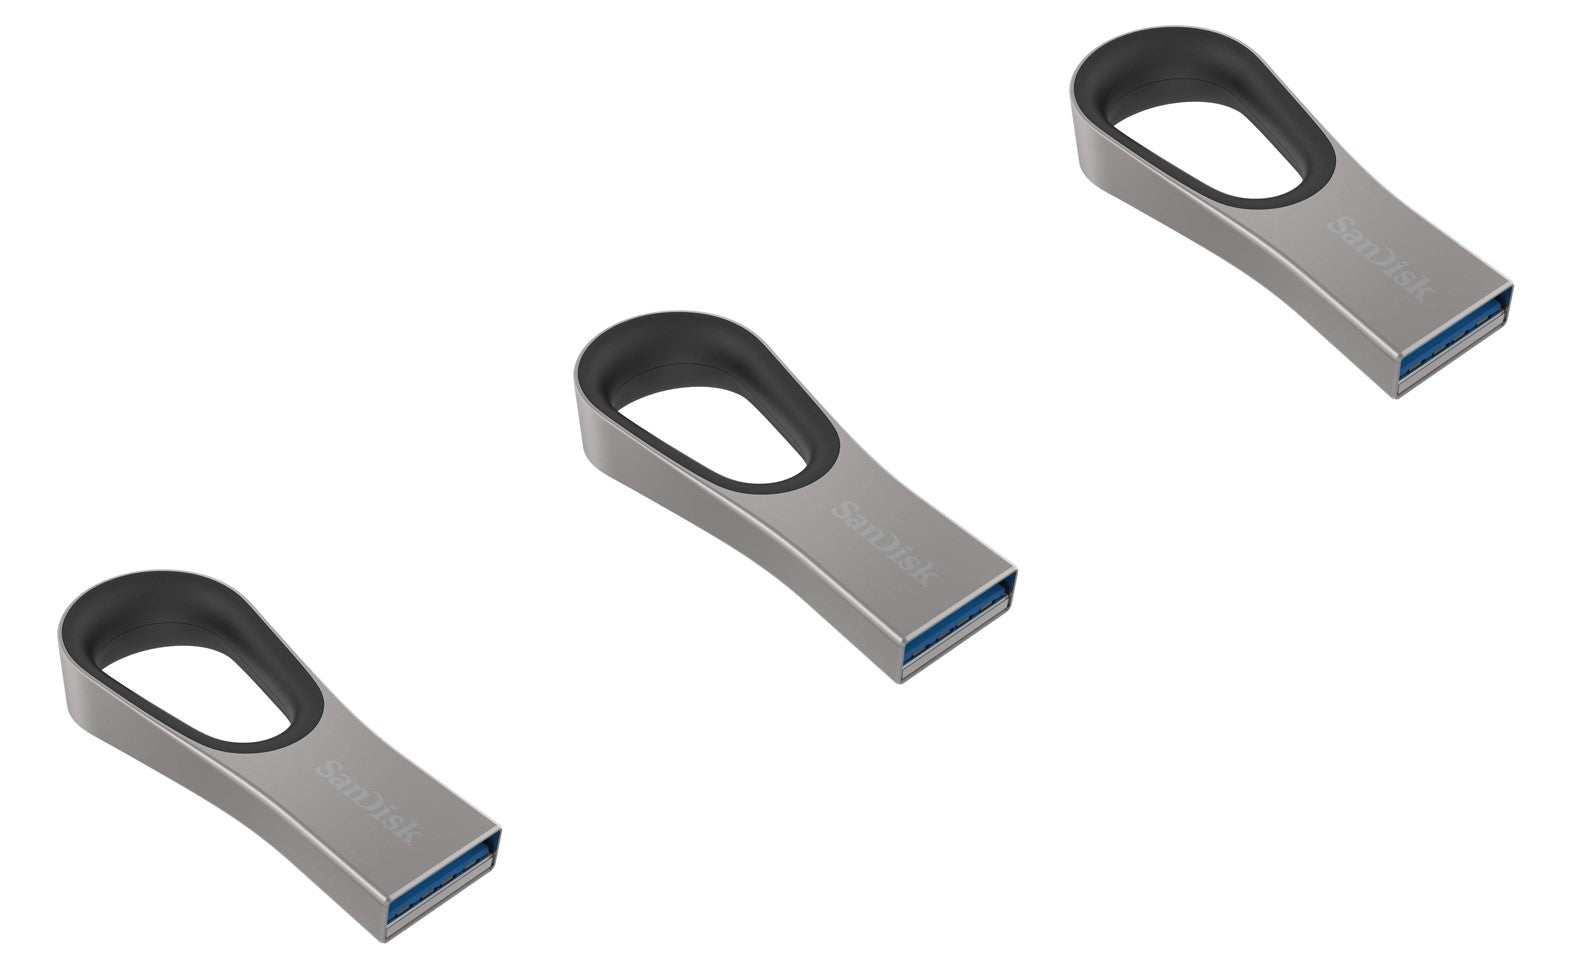 SanDisk 64GB Ultra Loop USB 3.0 Flash Drive - SDCZ93-064G-G46, Pack of 3